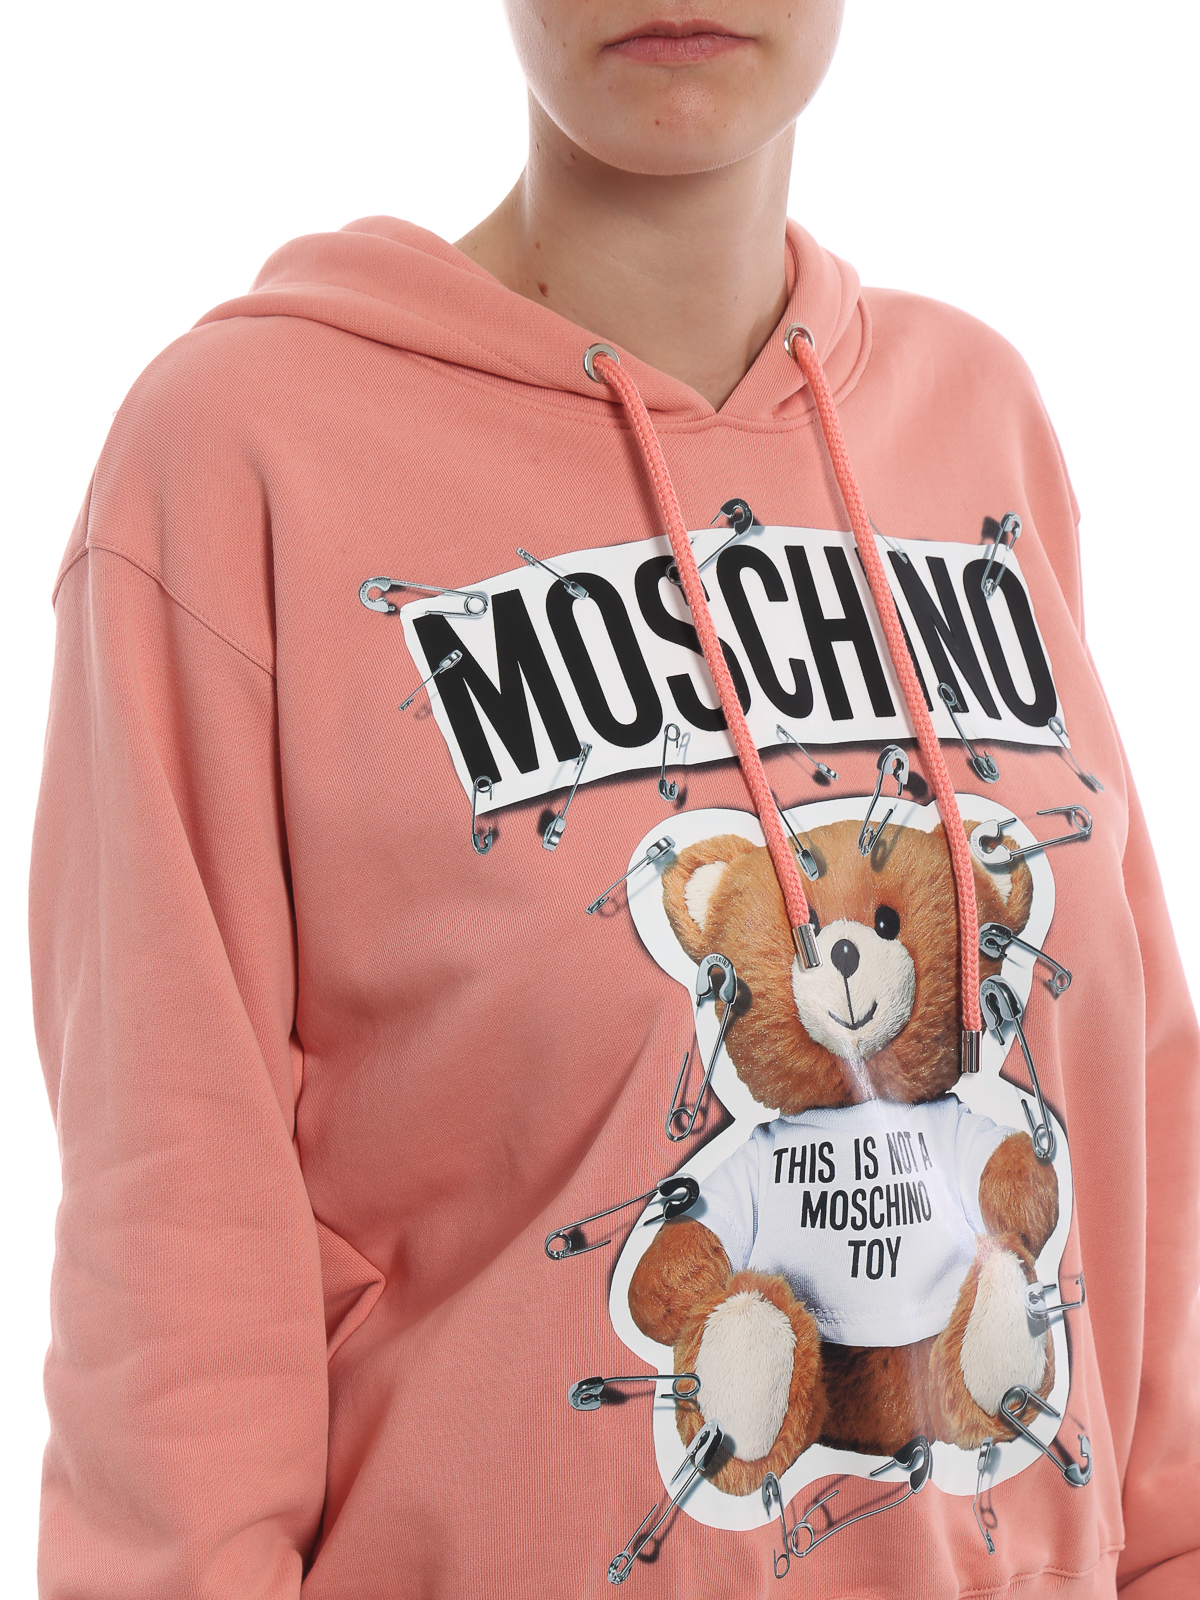 This is not a Moschino toy peach hoodie 